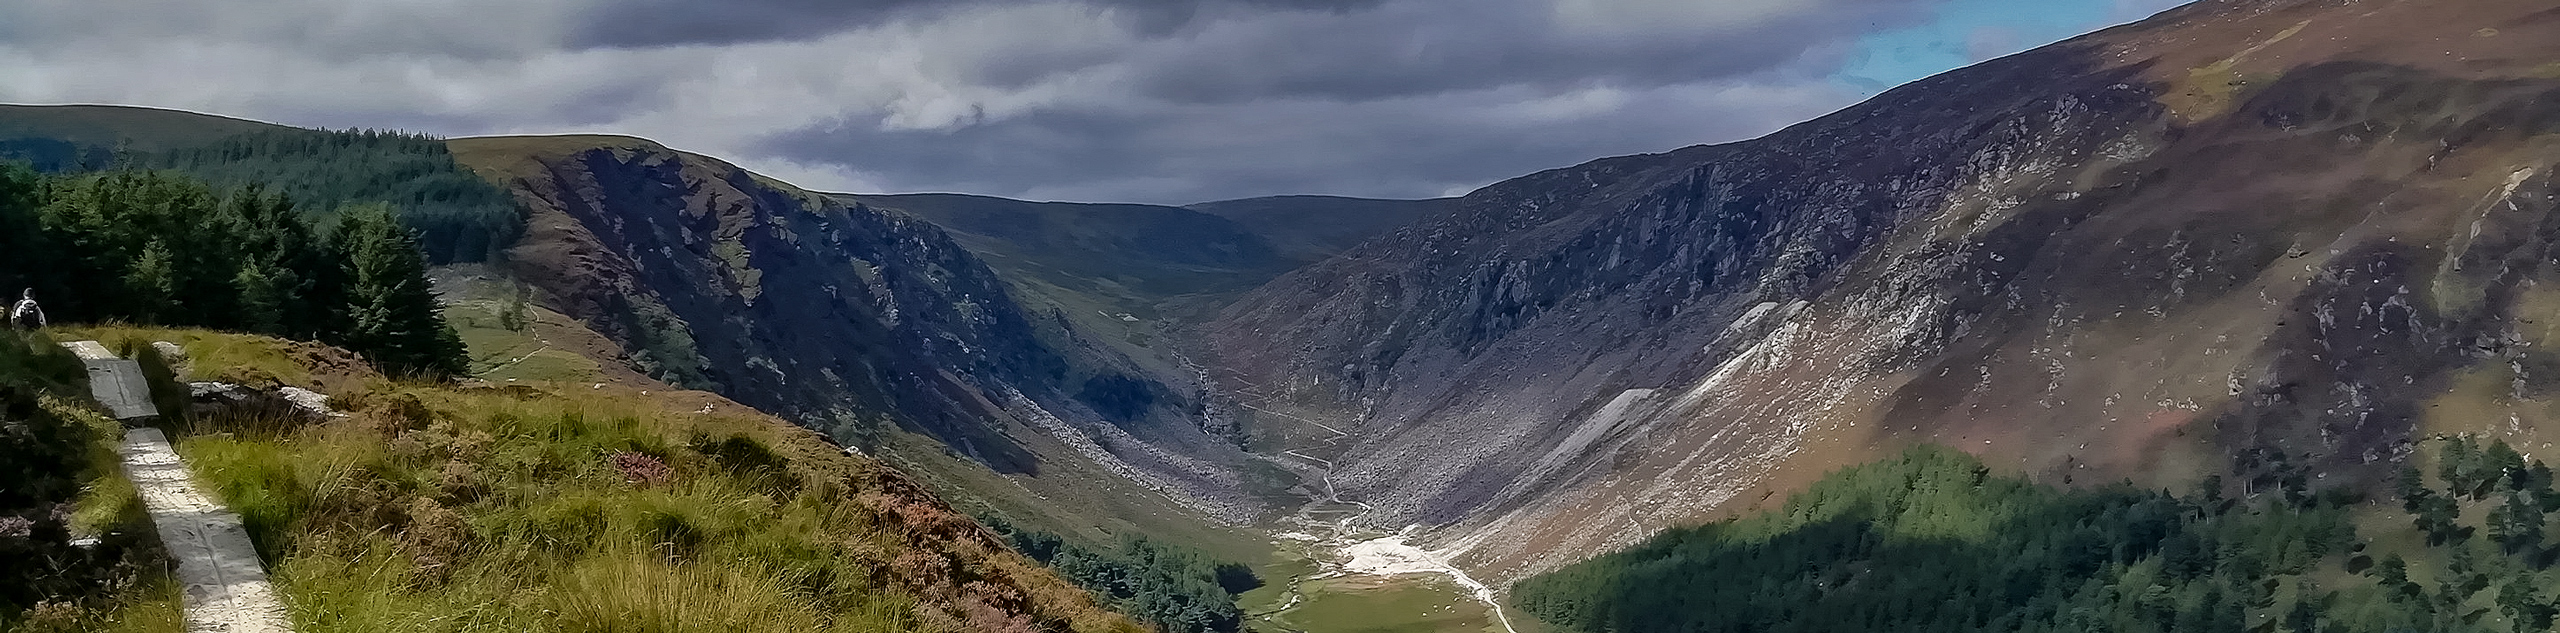 3-Day Self-Guided Wicklow Way Hiking Tour